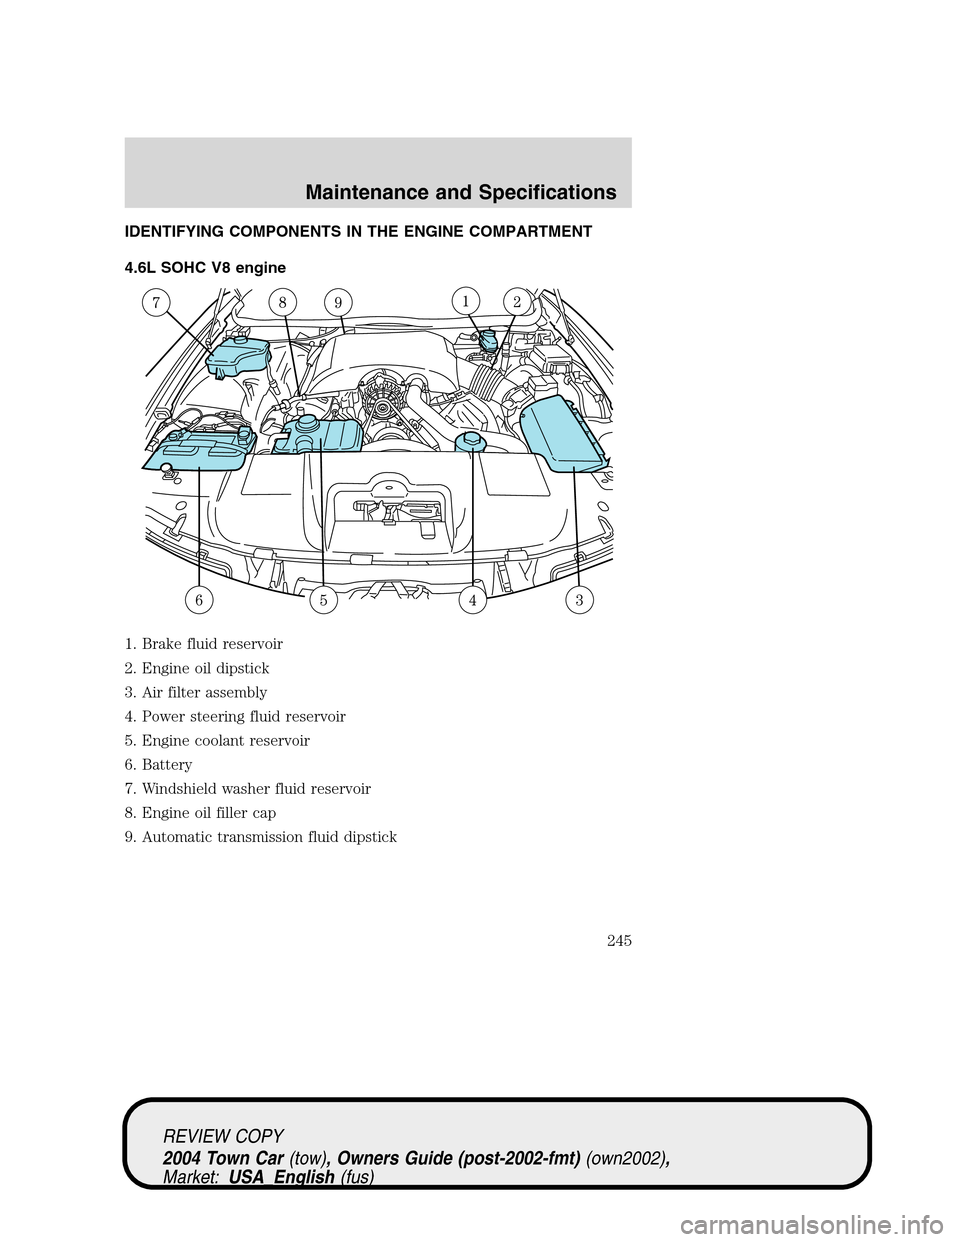 LINCOLN TOWN CAR 2004 Service Manual IDENTIFYING COMPONENTS IN THE ENGINE COMPARTMENT
4.6L SOHC V8 engine
1. Brake fluid reservoir
2. Engine oil dipstick
3. Air filter assembly
4. Power steering fluid reservoir
5. Engine coolant reservoi